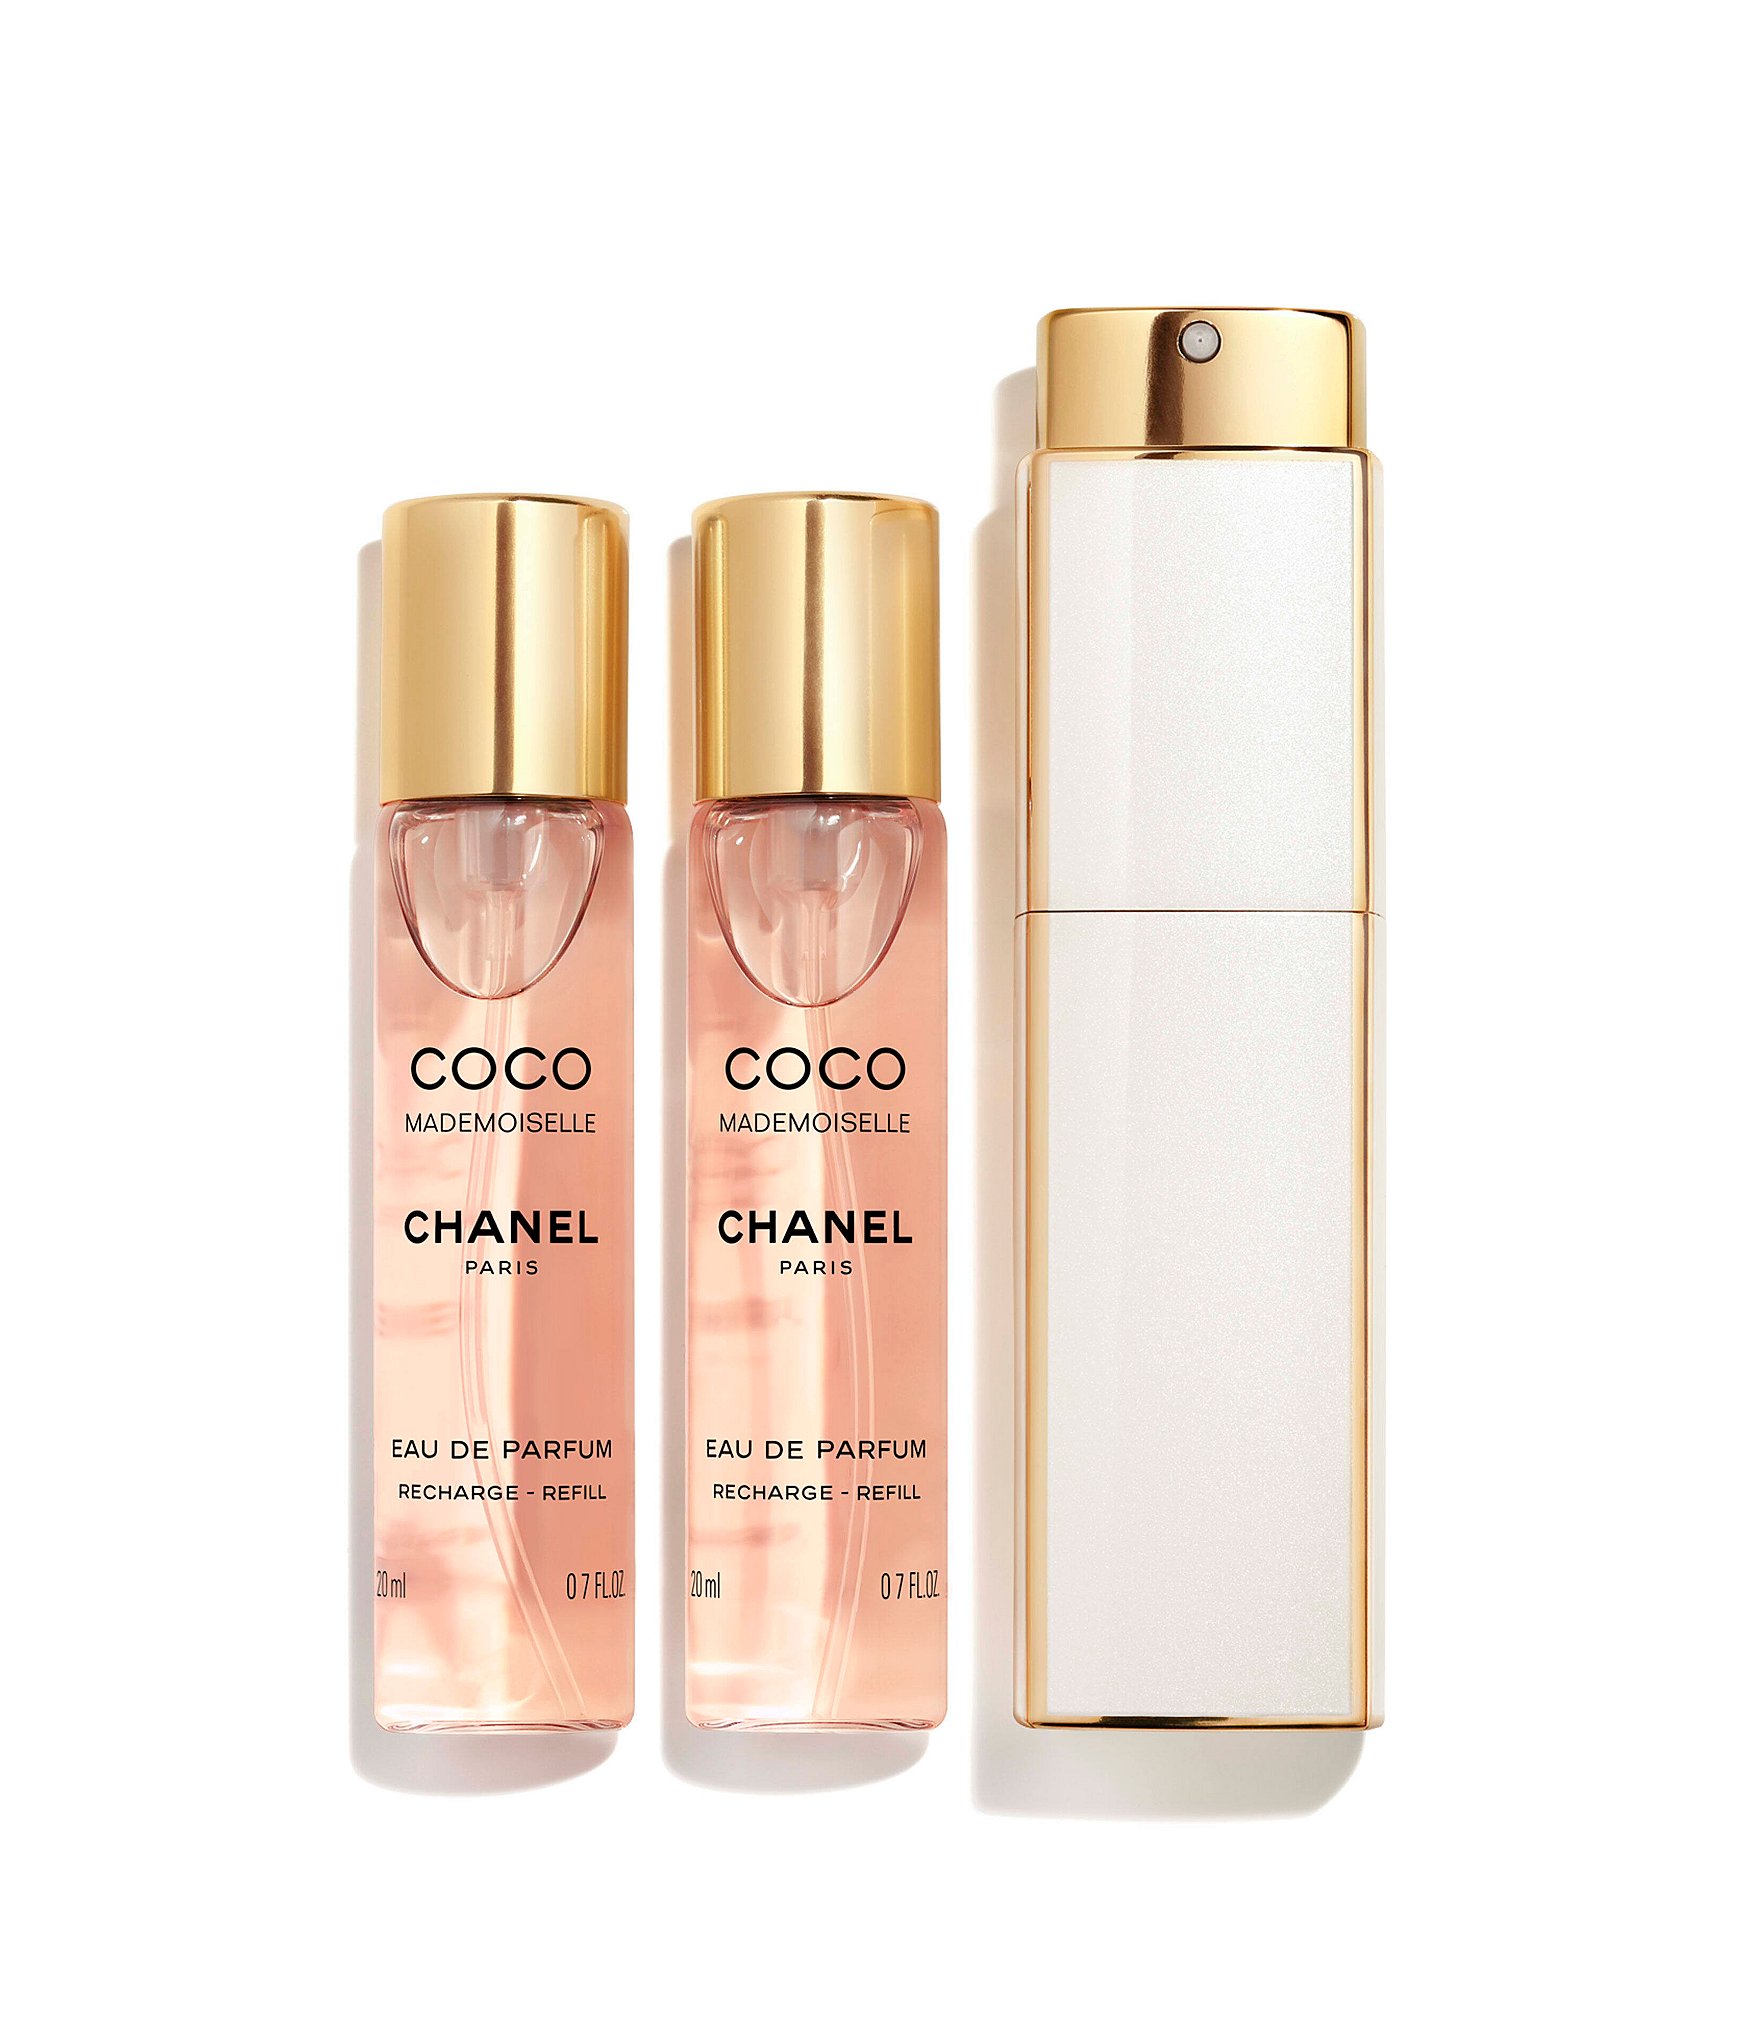 CHANEL Coco Mademoiselle Body Lotion Set, 1 Piece, Women's Fragrance new  inbox for Sale in HALNDLE BCH, FL - OfferUp